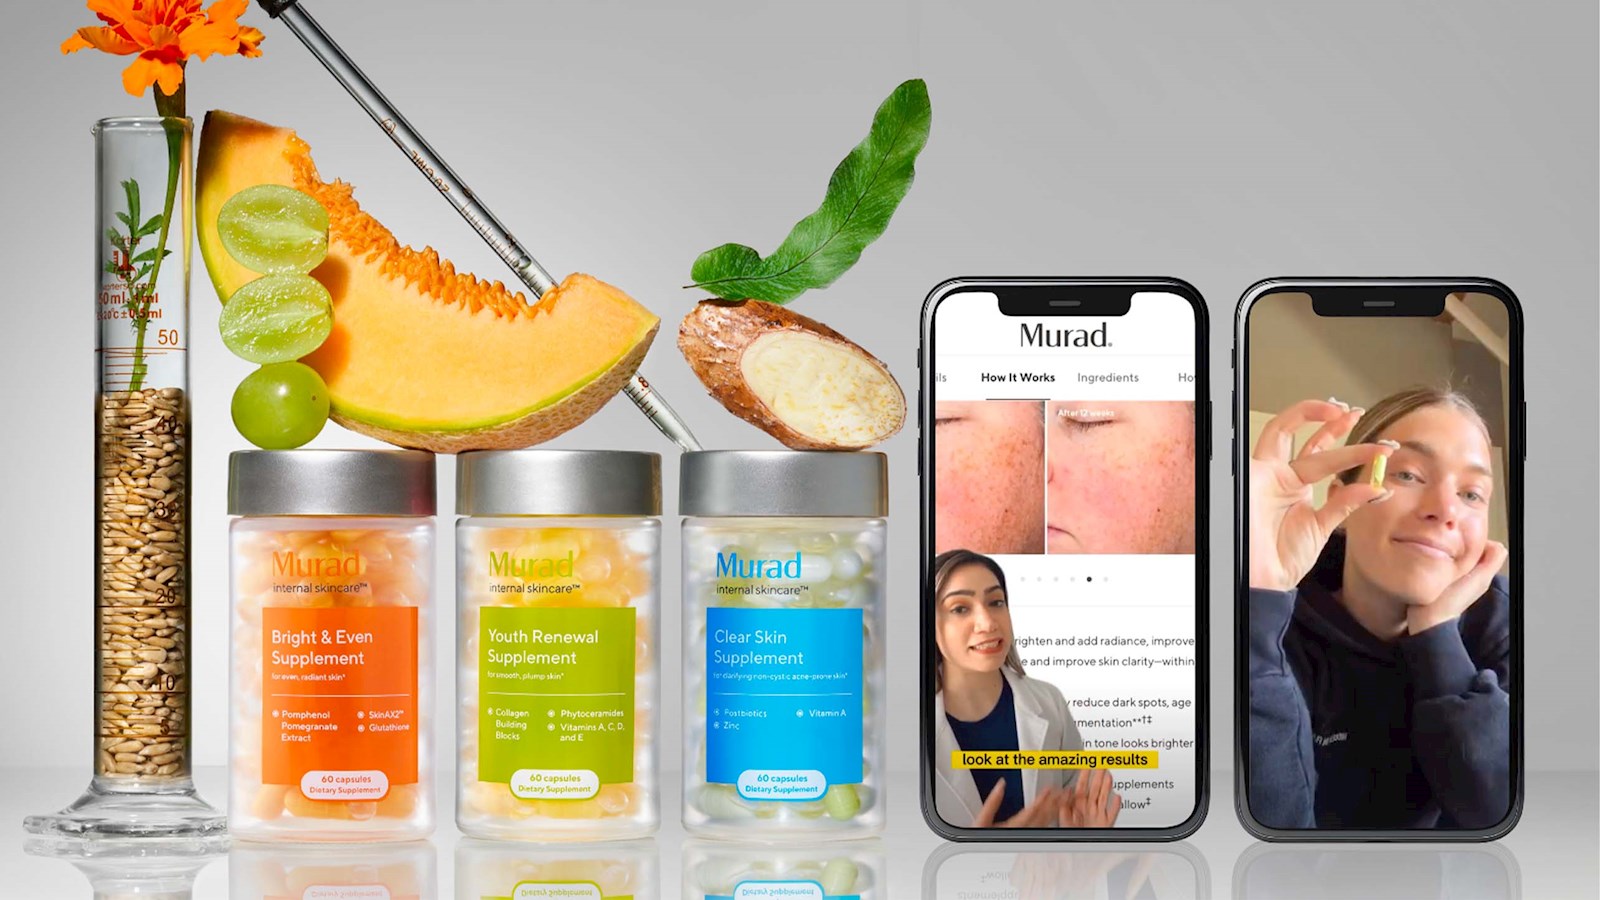  Murad product with pomegranate and papaya stacked on it, next to a vase with an orange flower in it and a pipette leaning across it and phone screens showing before and after